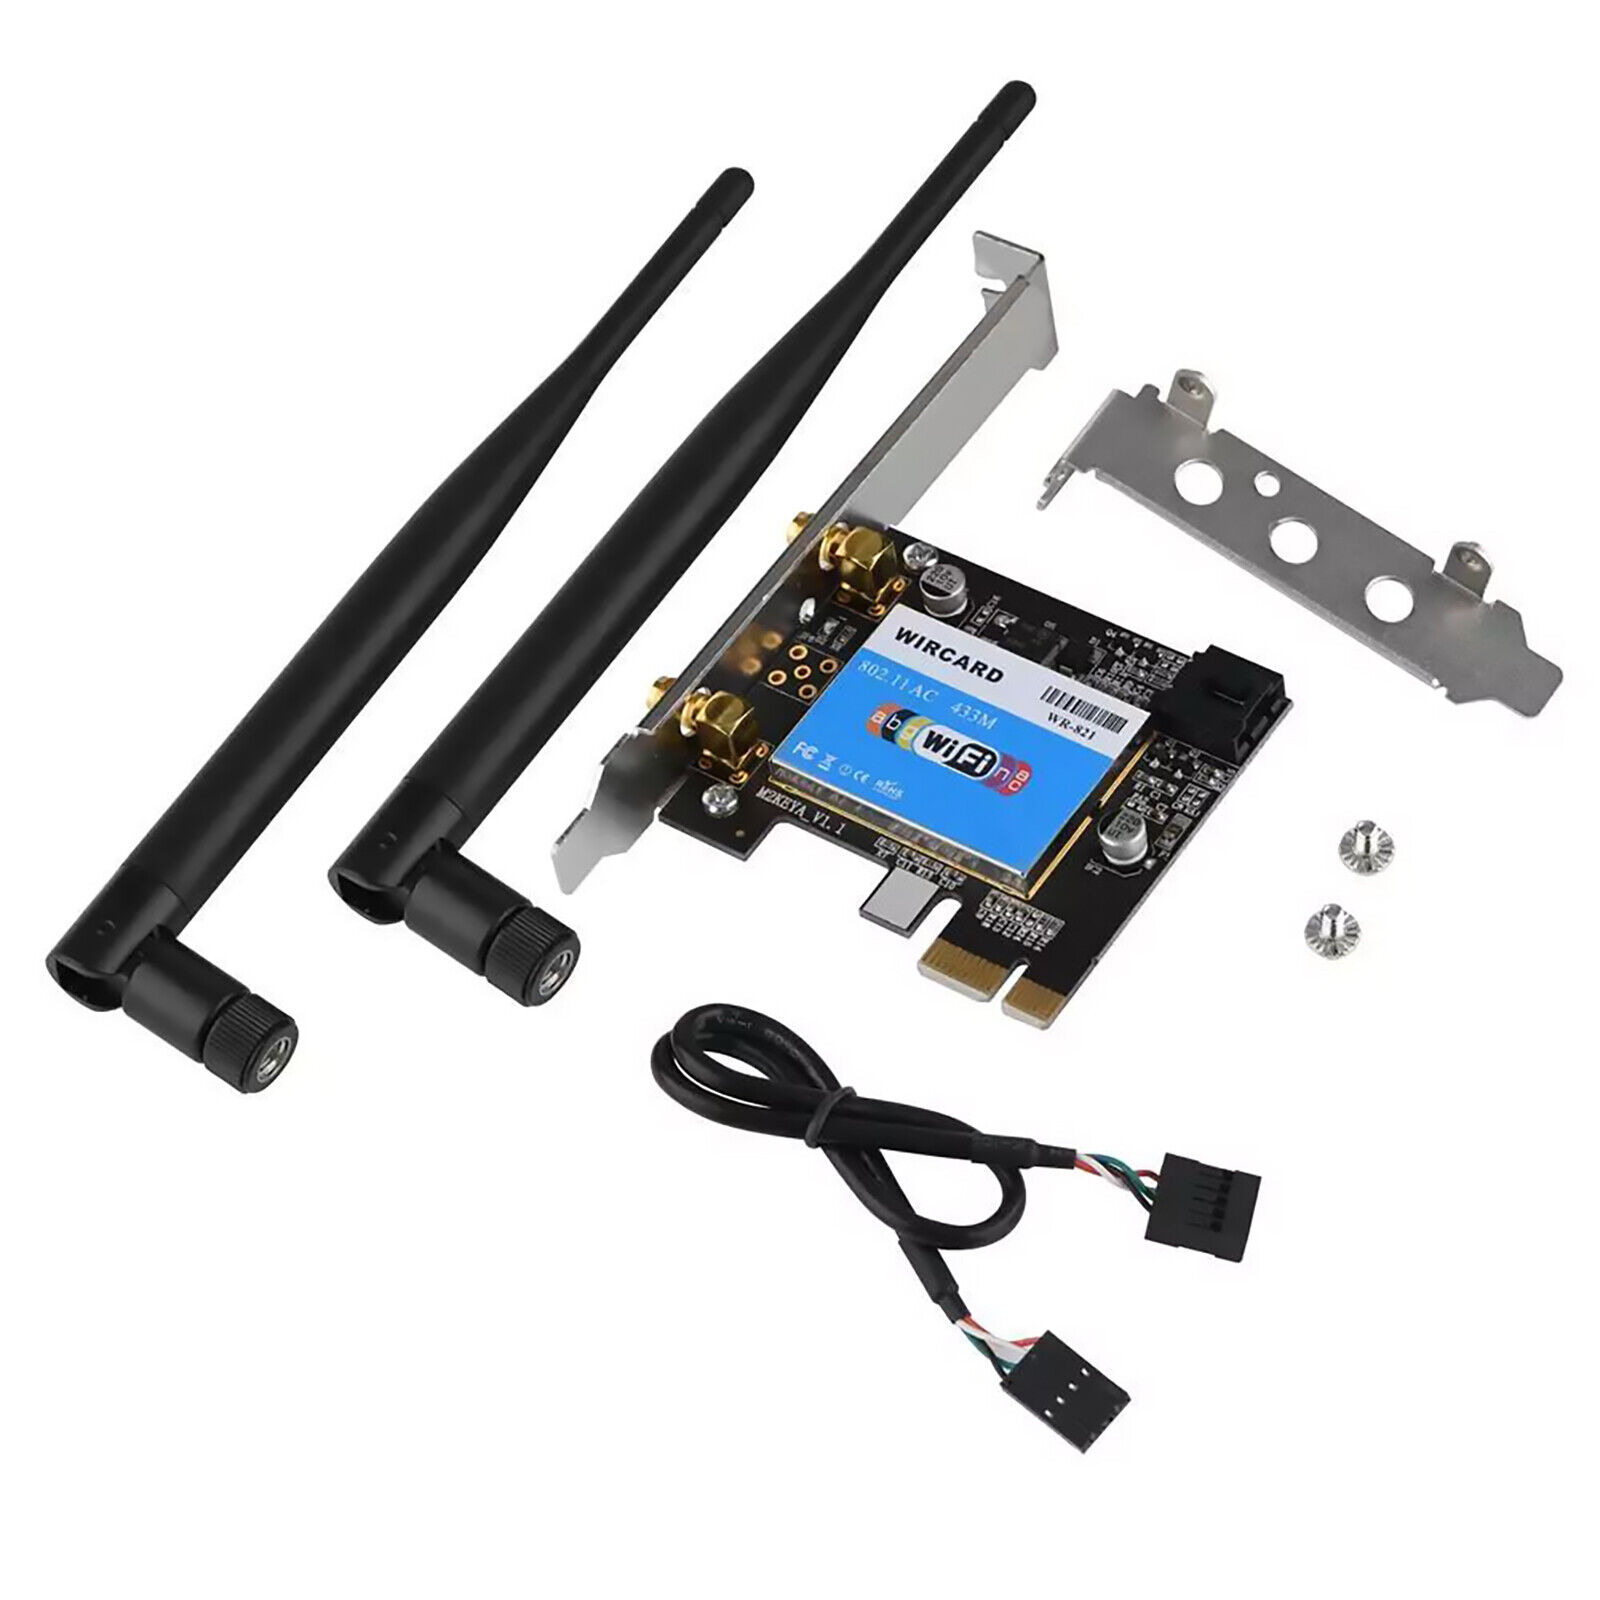 433Mbps PCI-E Network Card WiFi Dual Band 2.4G/5G Wireless LAN Adapter New